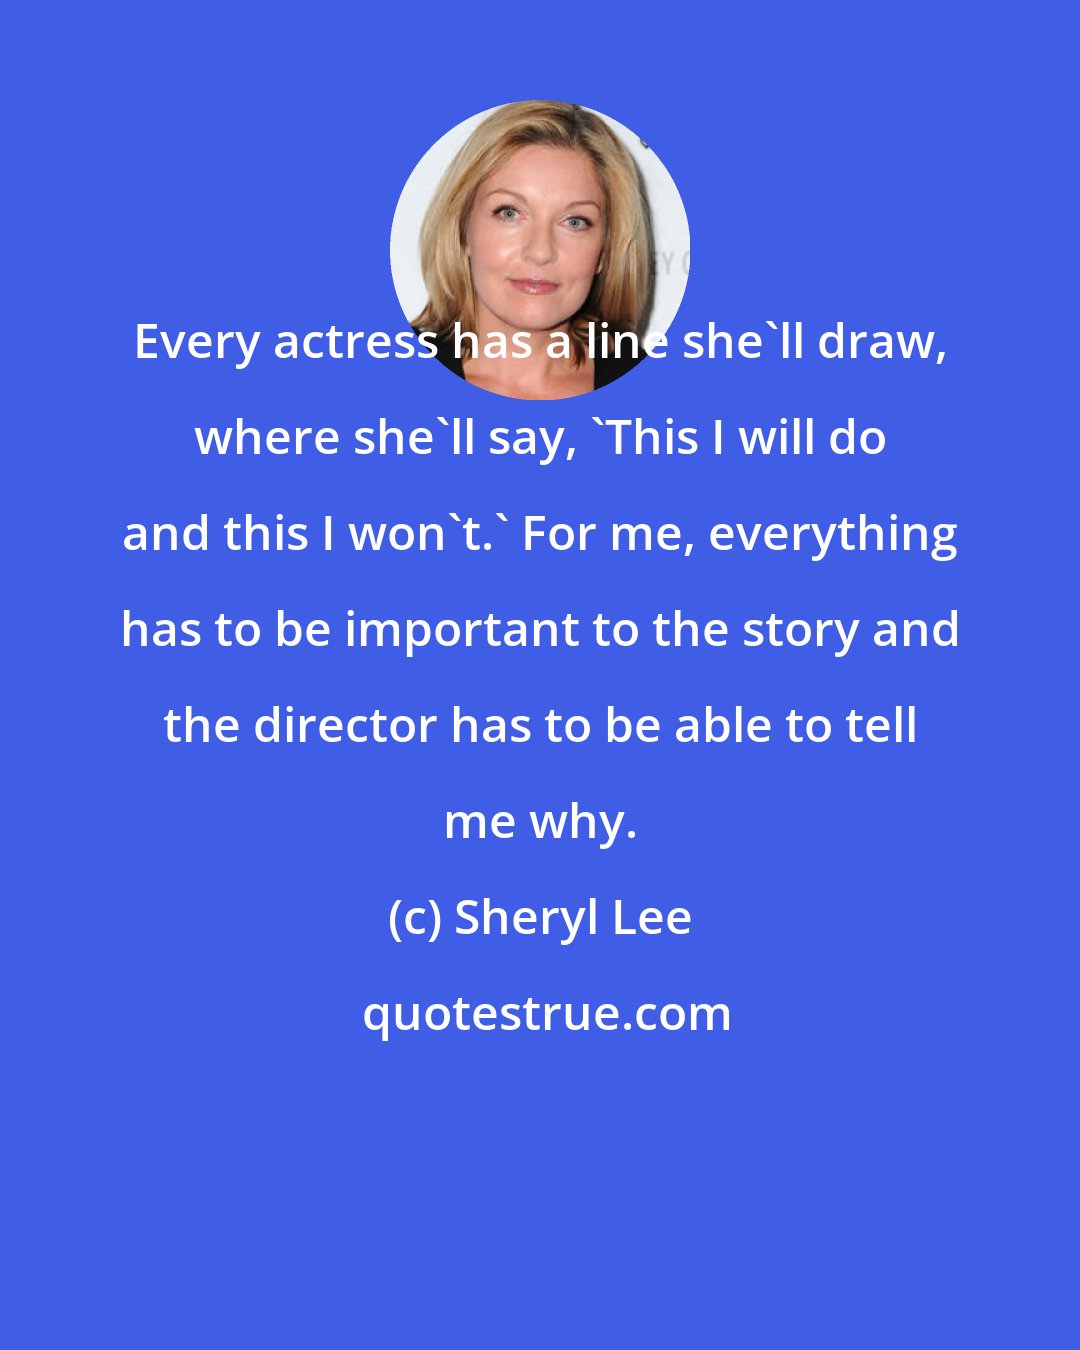 Sheryl Lee: Every actress has a line she'll draw, where she'll say, 'This I will do and this I won't.' For me, everything has to be important to the story and the director has to be able to tell me why.